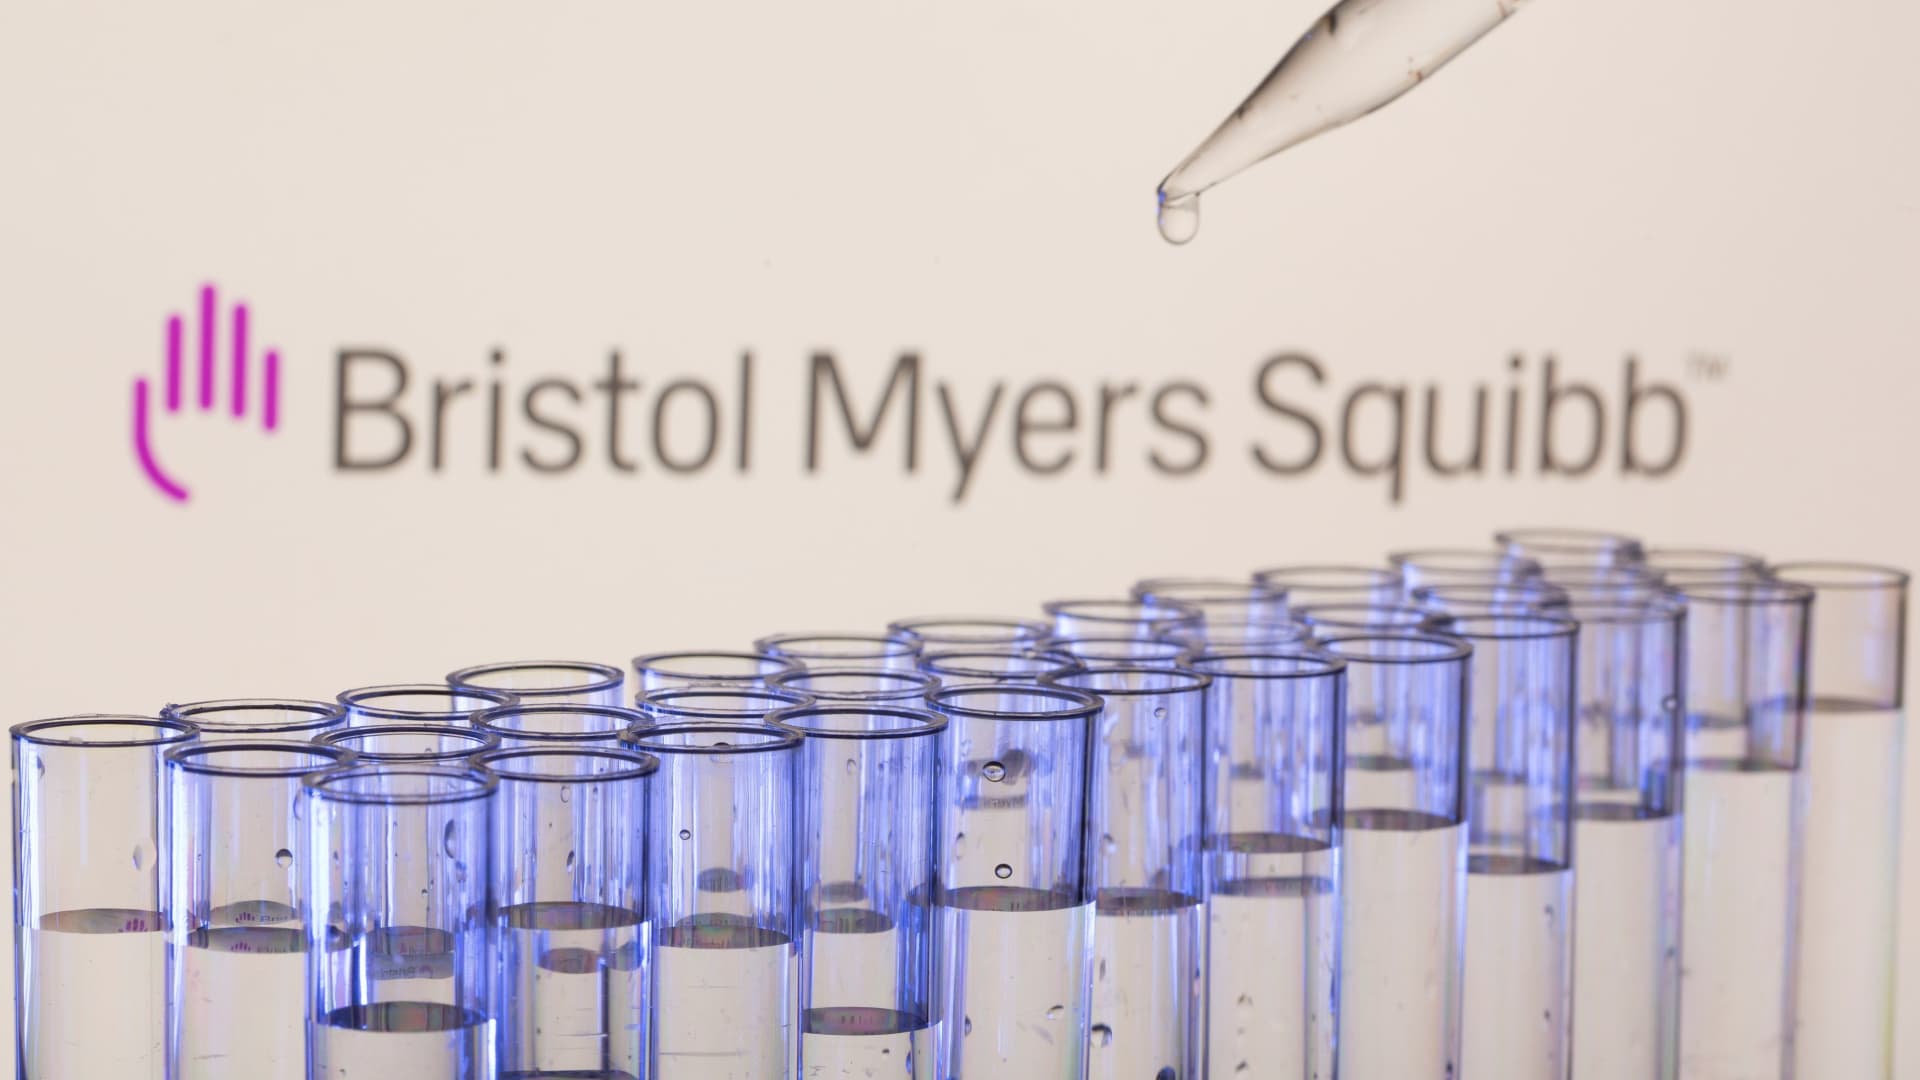 Shares making the greatest moves midday: Bristol-Myers Squibb, Twitter, Gilead Sciences and more